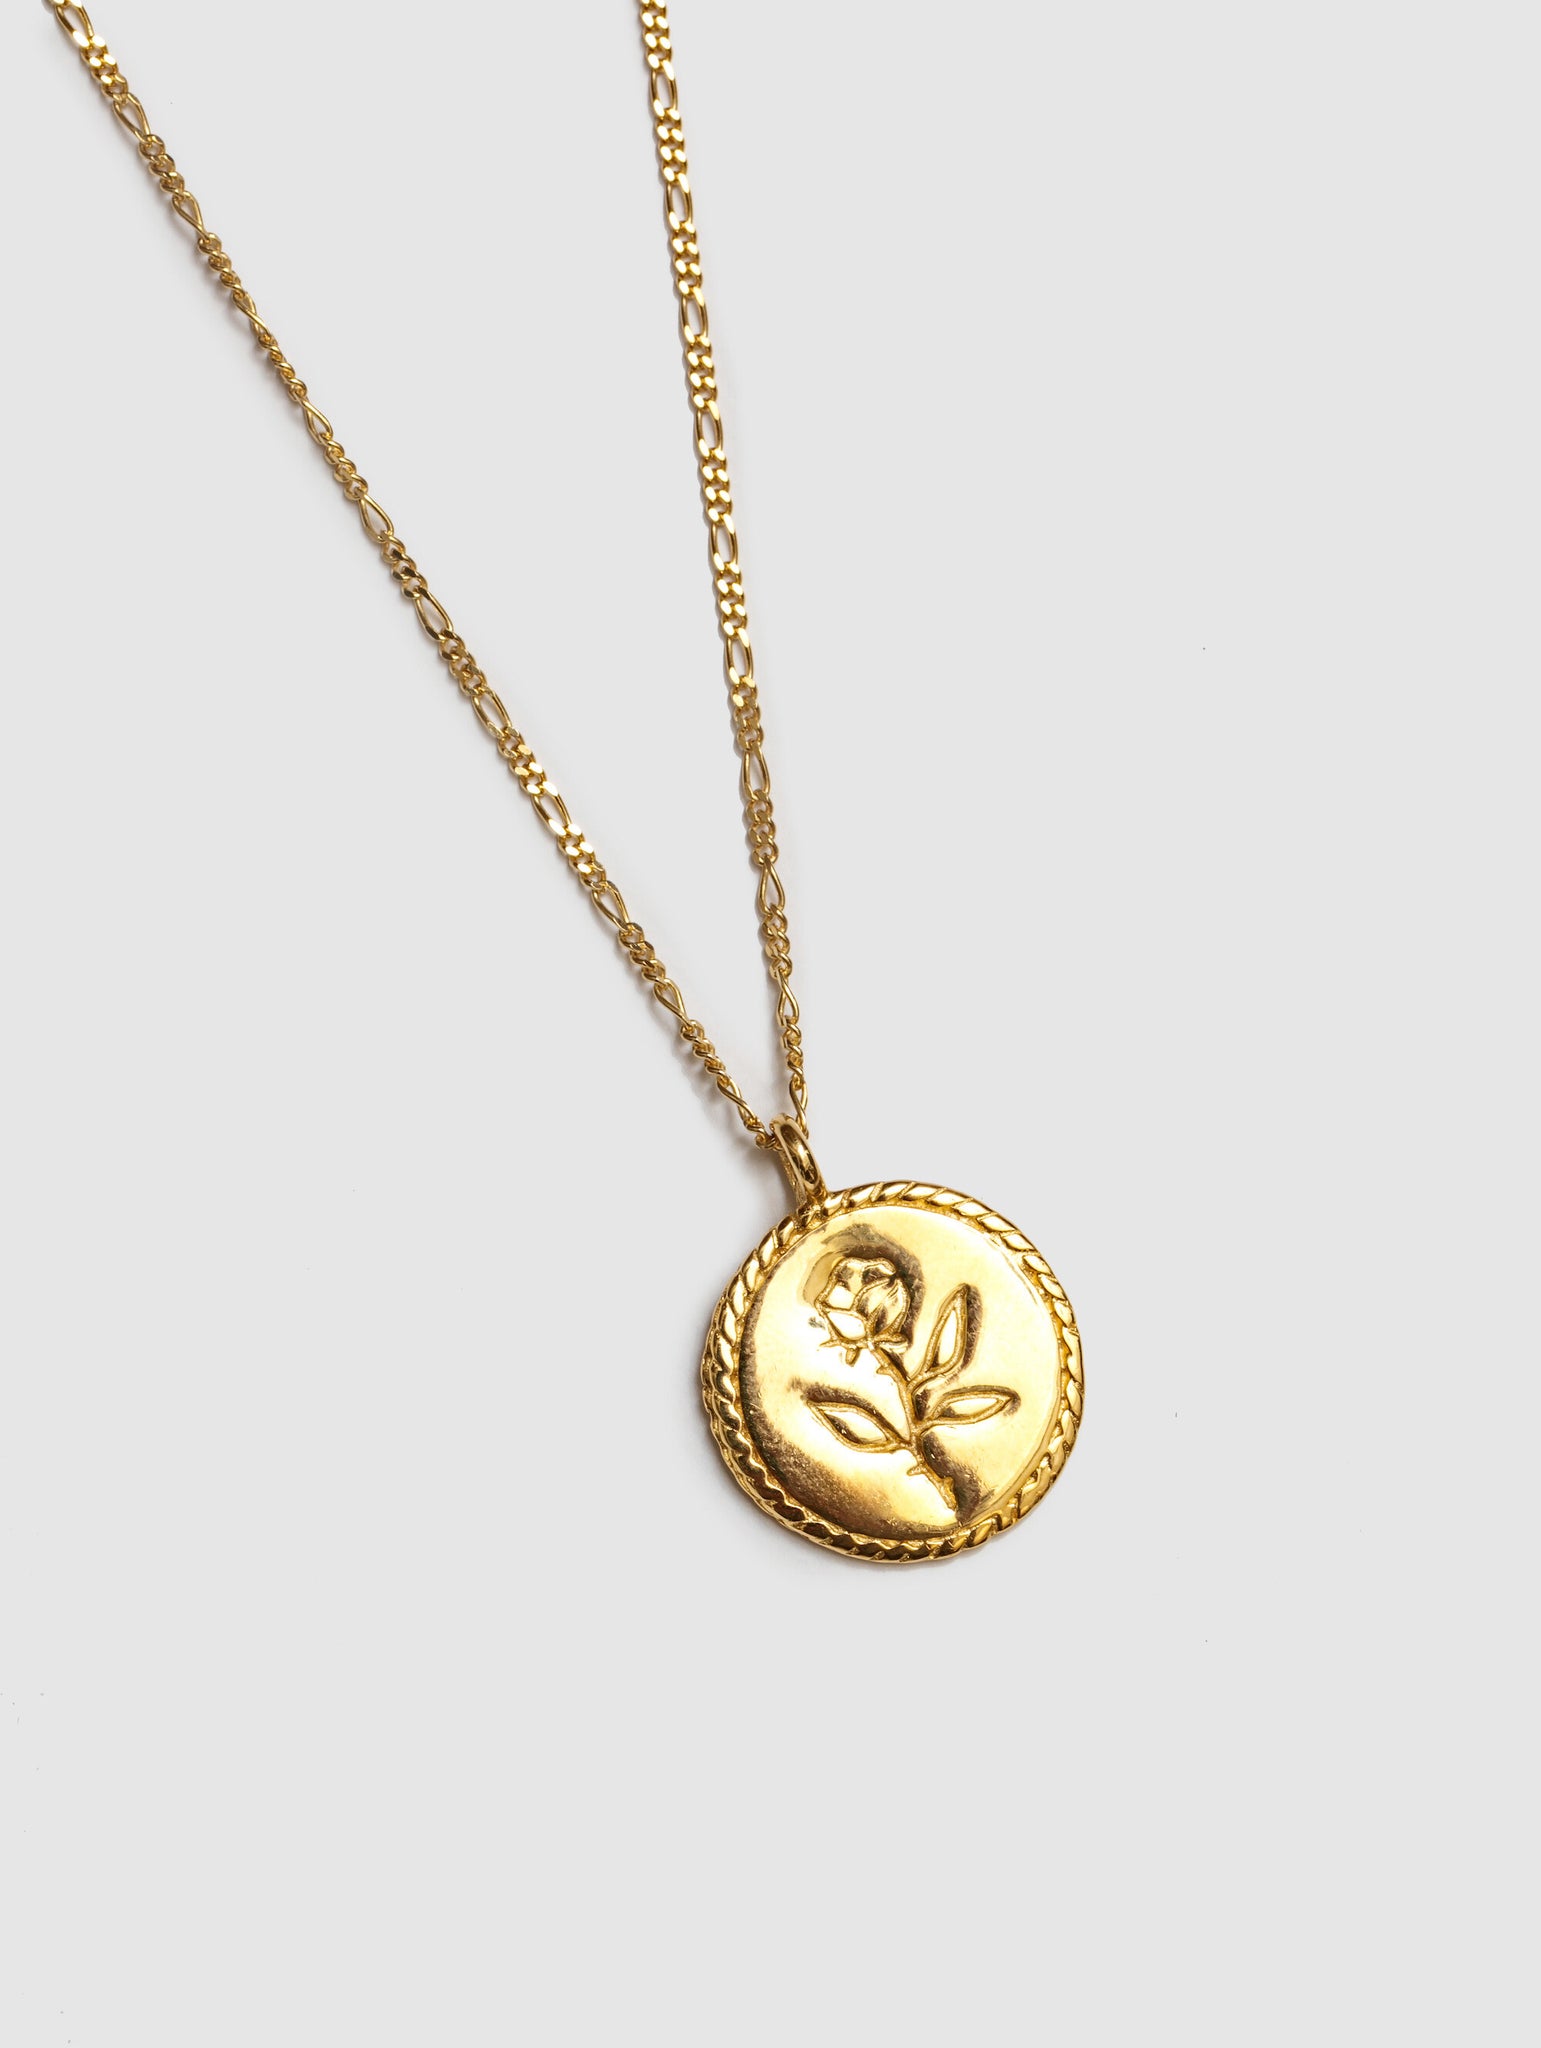 Wolf Circus Rose Coin Pendant Necklace in 14k Gold Plated | Recycled Metals | Circular Engraved Pendant & Singapore Chain-Necklaces-wolfcircus.com